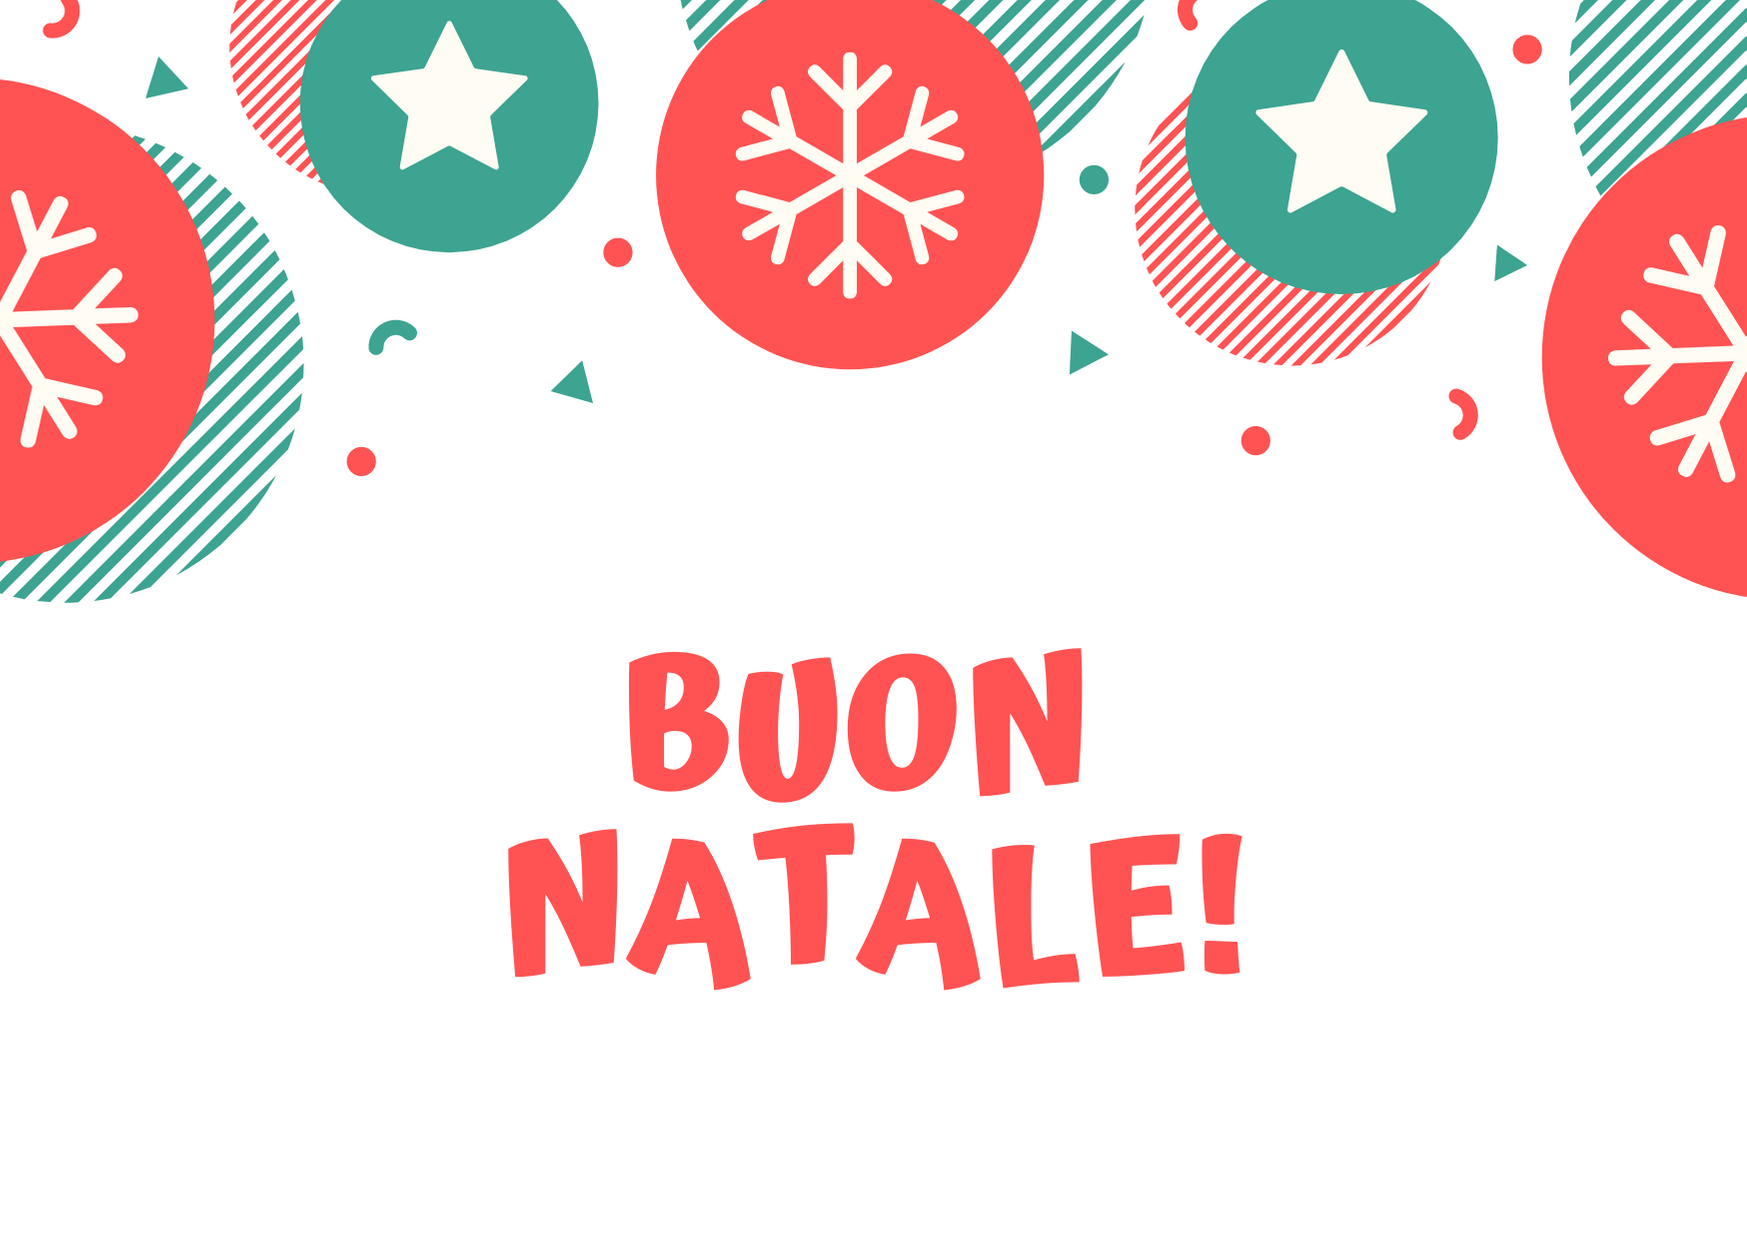 White seed paper greeting card with vintage design says "Buon Natale"